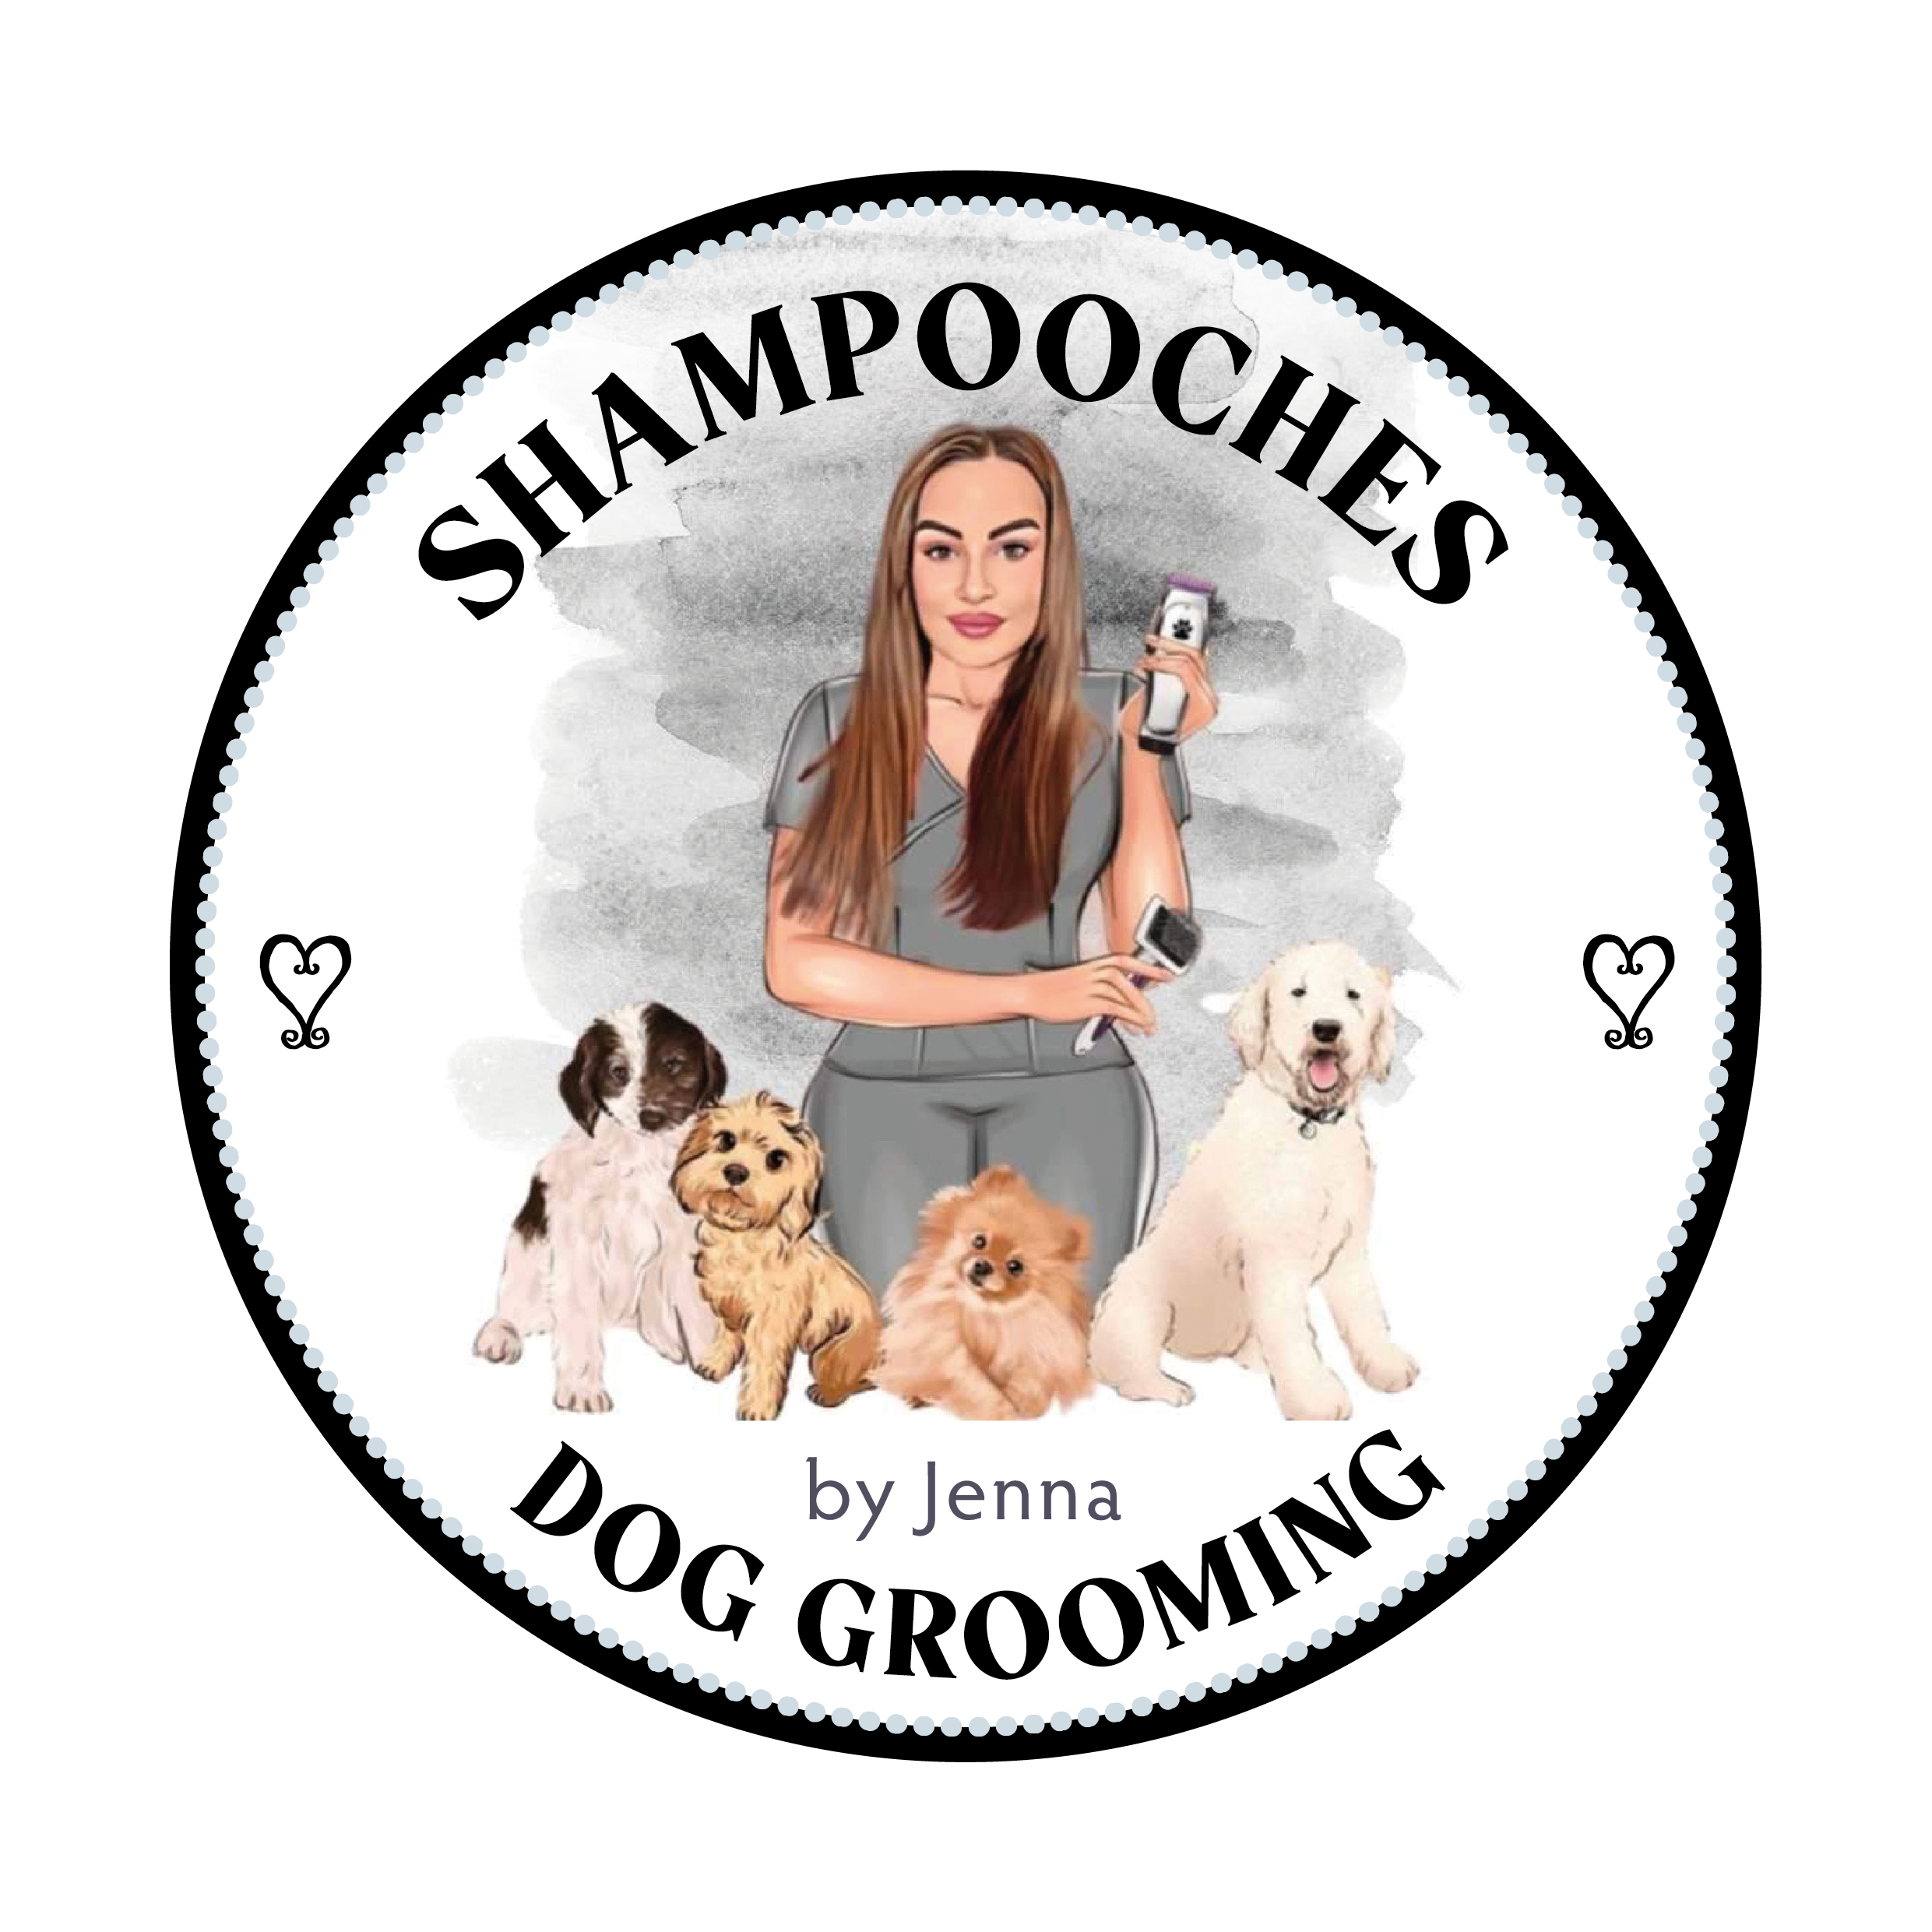 Business logo for Shampooches 